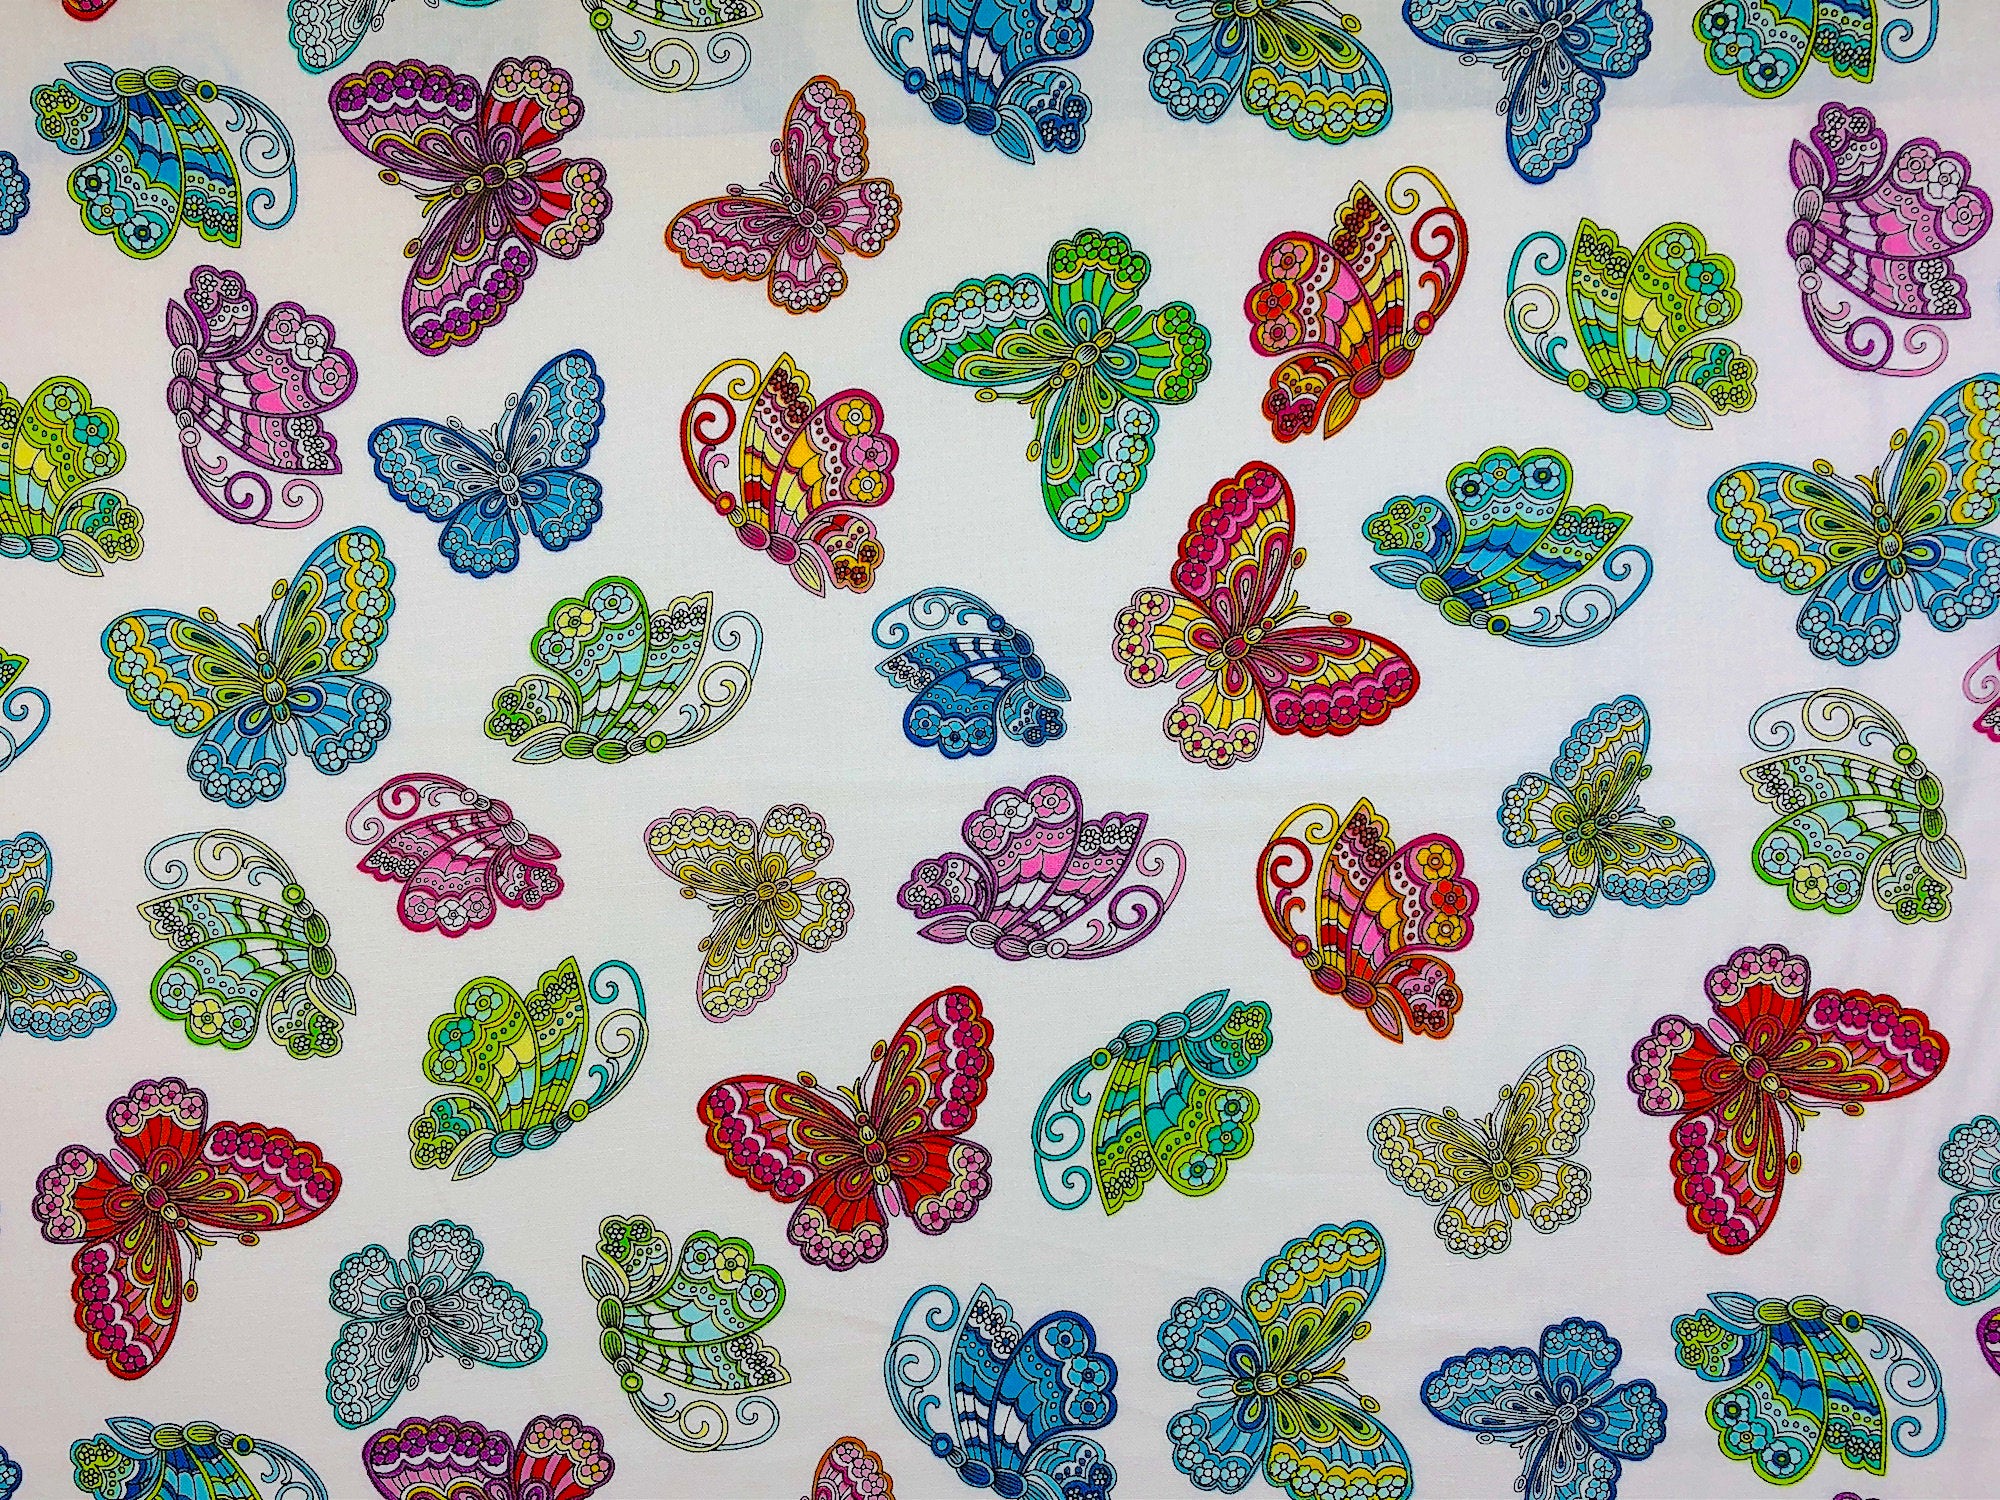 This white fabric is part of the Dazzling Garden Collection and is covered with butterflies. The butterflies are blue, green red, yellow, pink and orange.